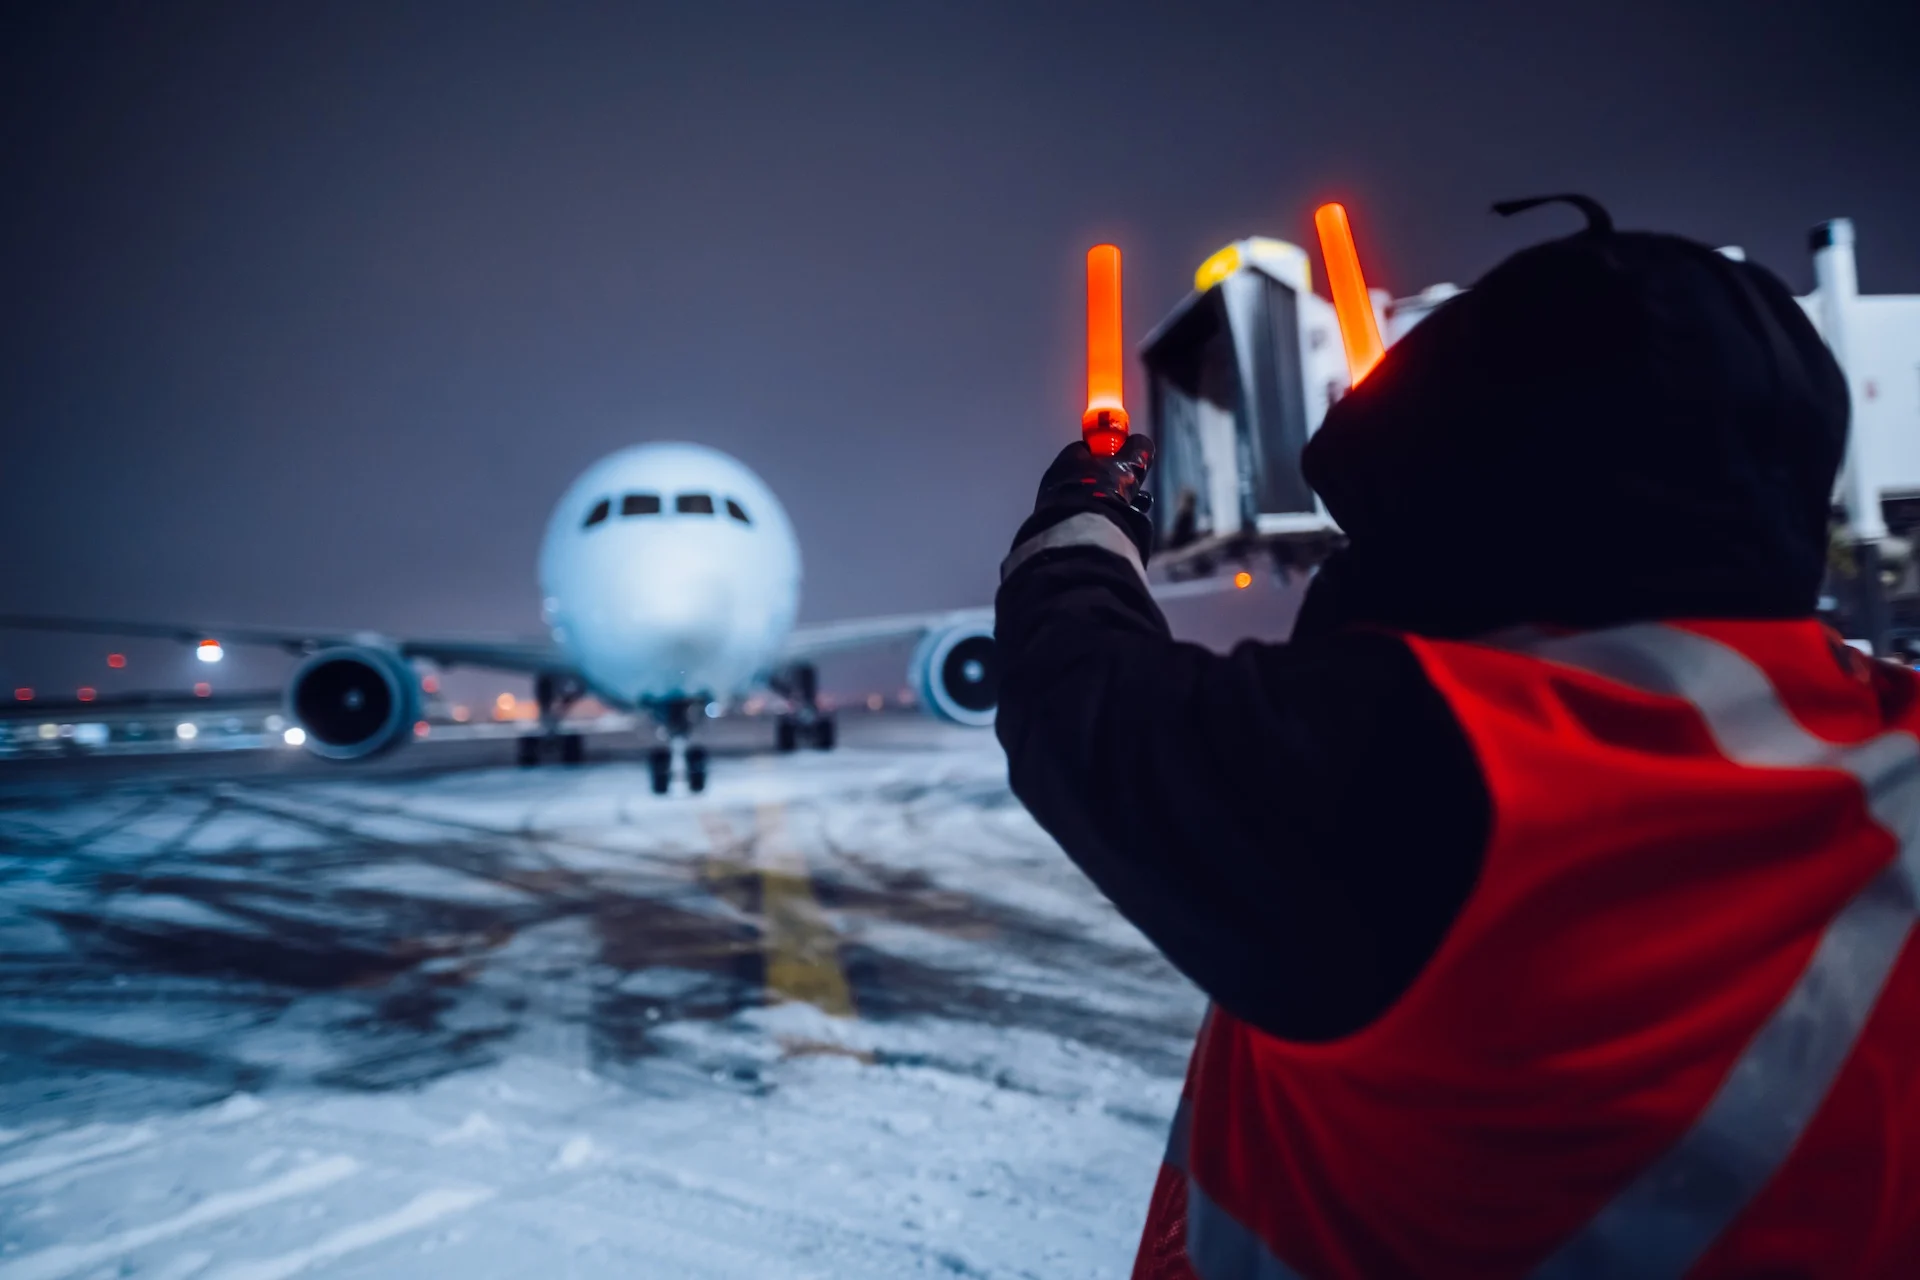 How one of Canada's busiest airports navigates tough winter weather